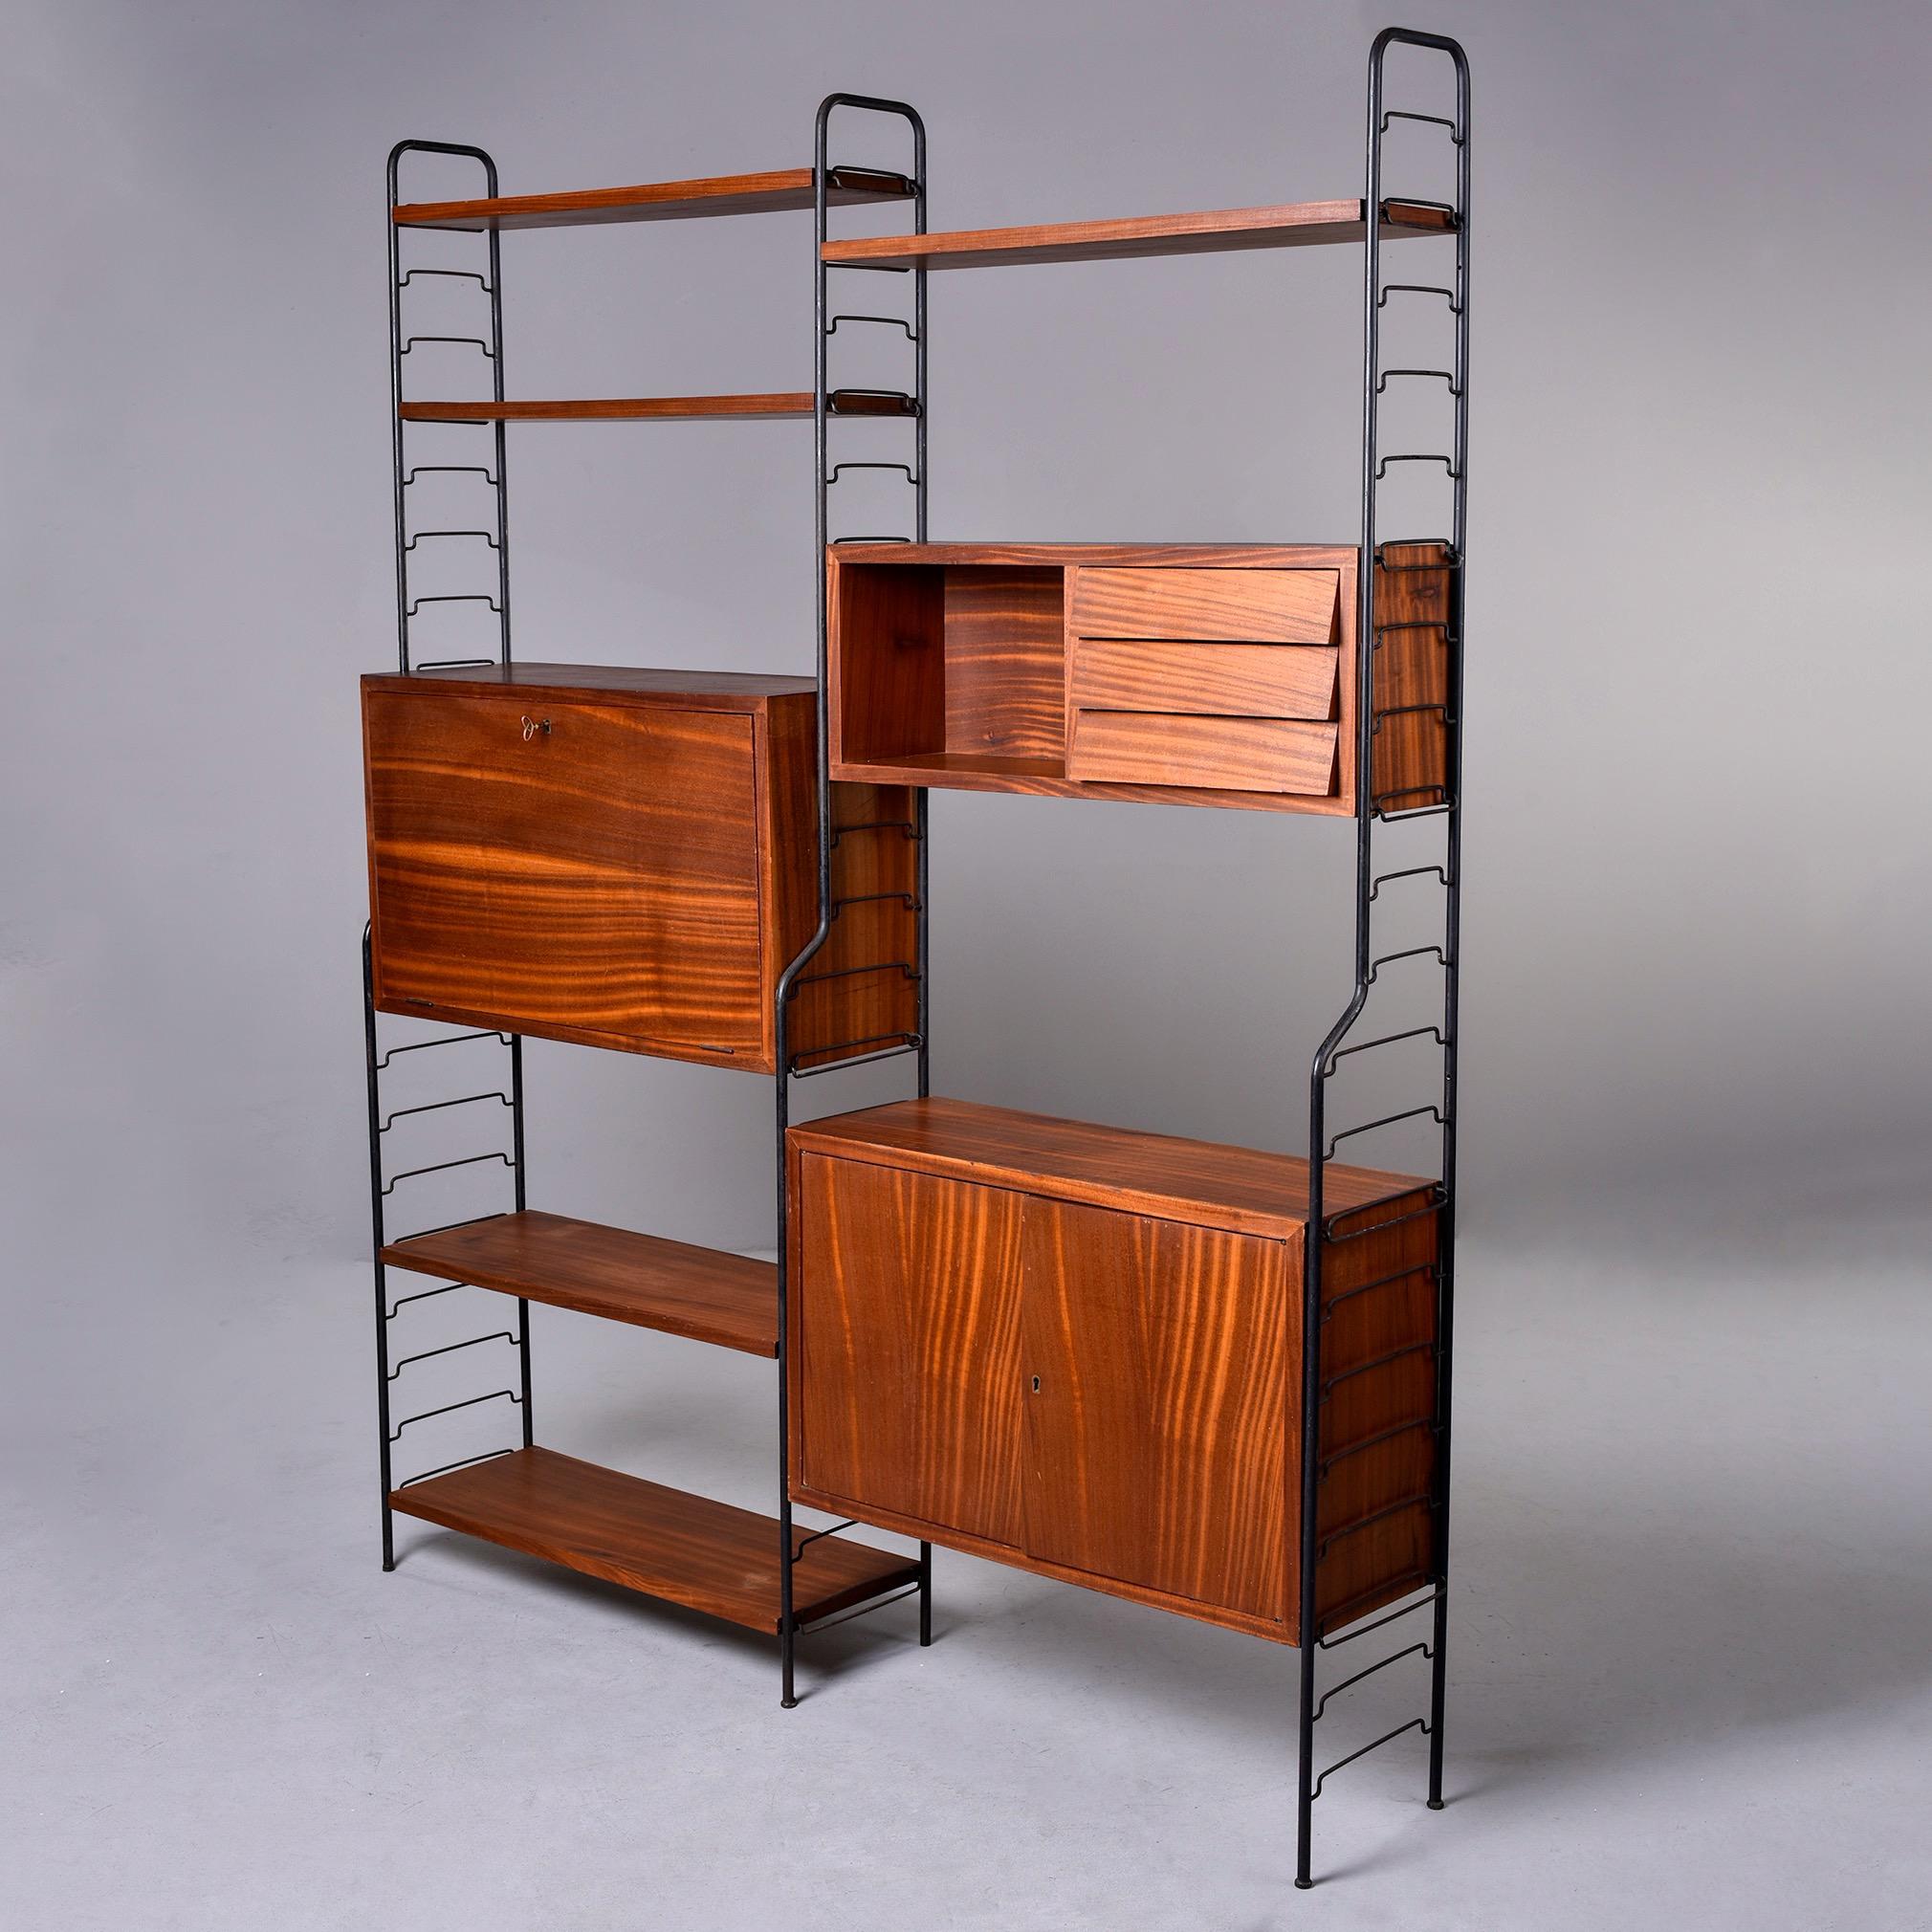 Found in Italy, this circa 1960s free standing modular shelf unit consists of three black metal frame sections five shelves, a locking cabinet with fold down desk, a cabinet with an open shelf and three drawers and a locking two door cabinet. The